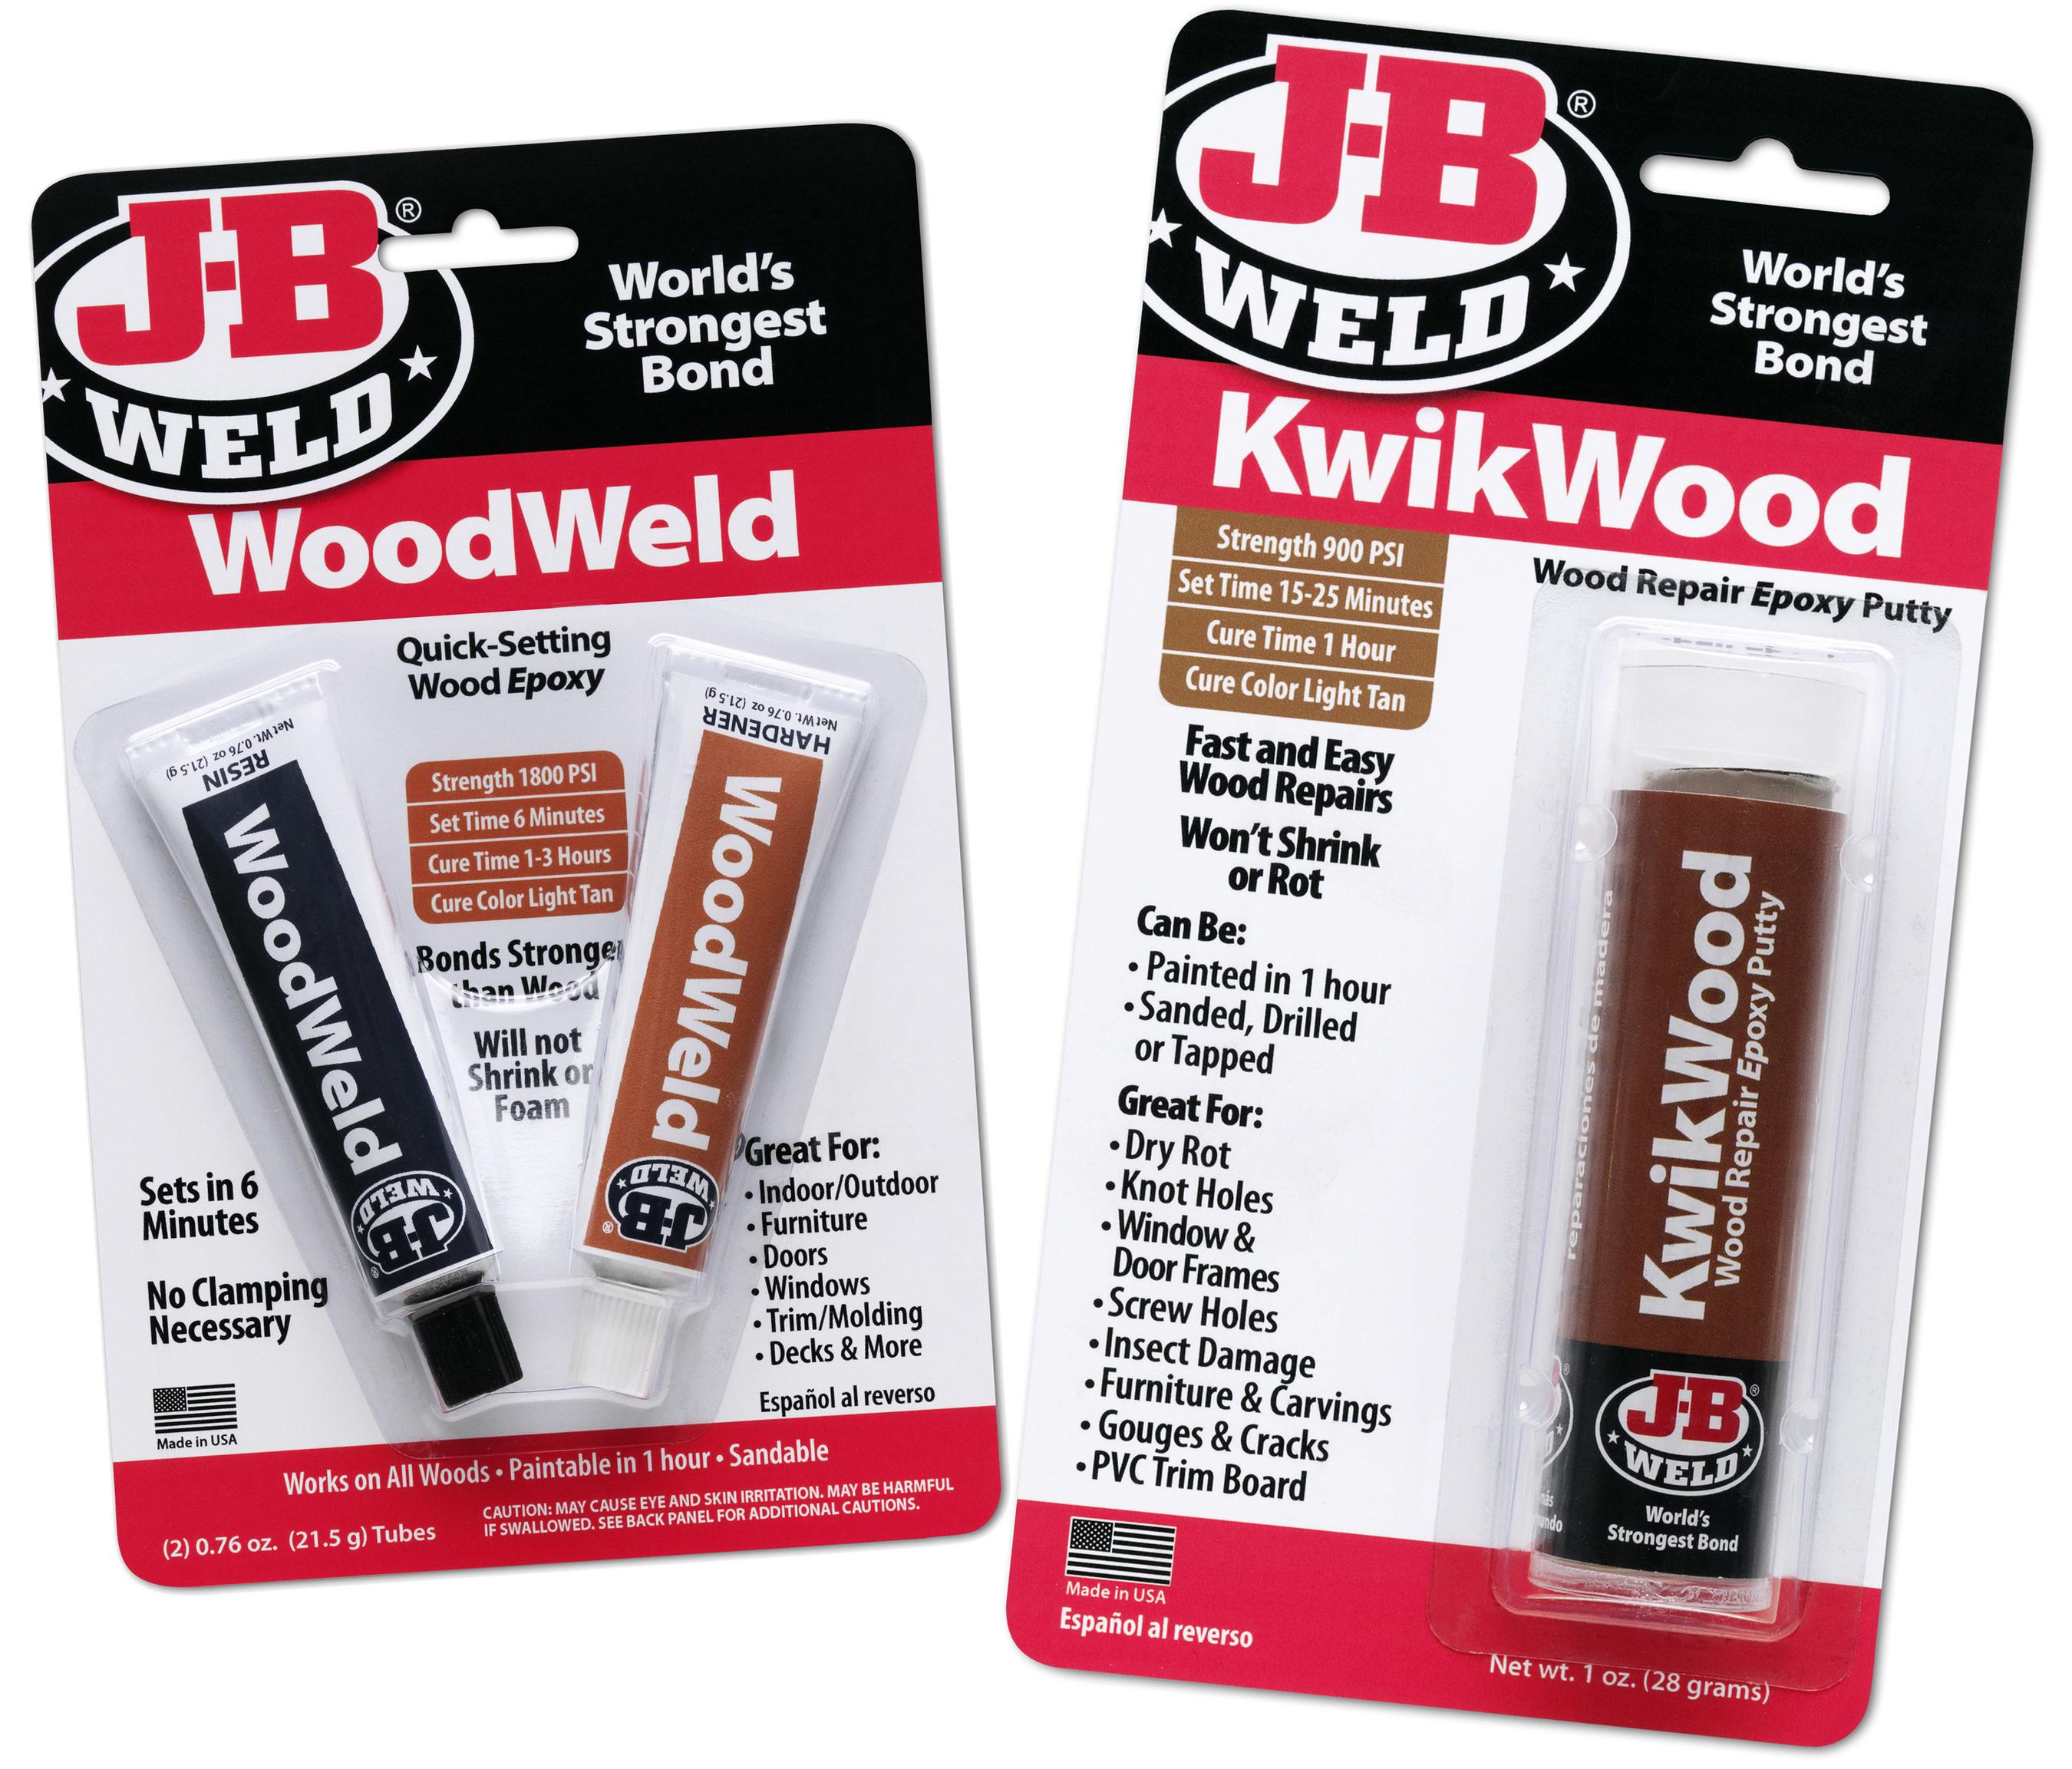 WoodWeld and KwikWood provide the world’s strongest bond for use on new projects or repairing older, damaged woods. The permanent bond is much stronger than glue and once cured, it can be shaped, tapped, filed, sanded or drilled. (PRNewsFoto/J-B Weld)